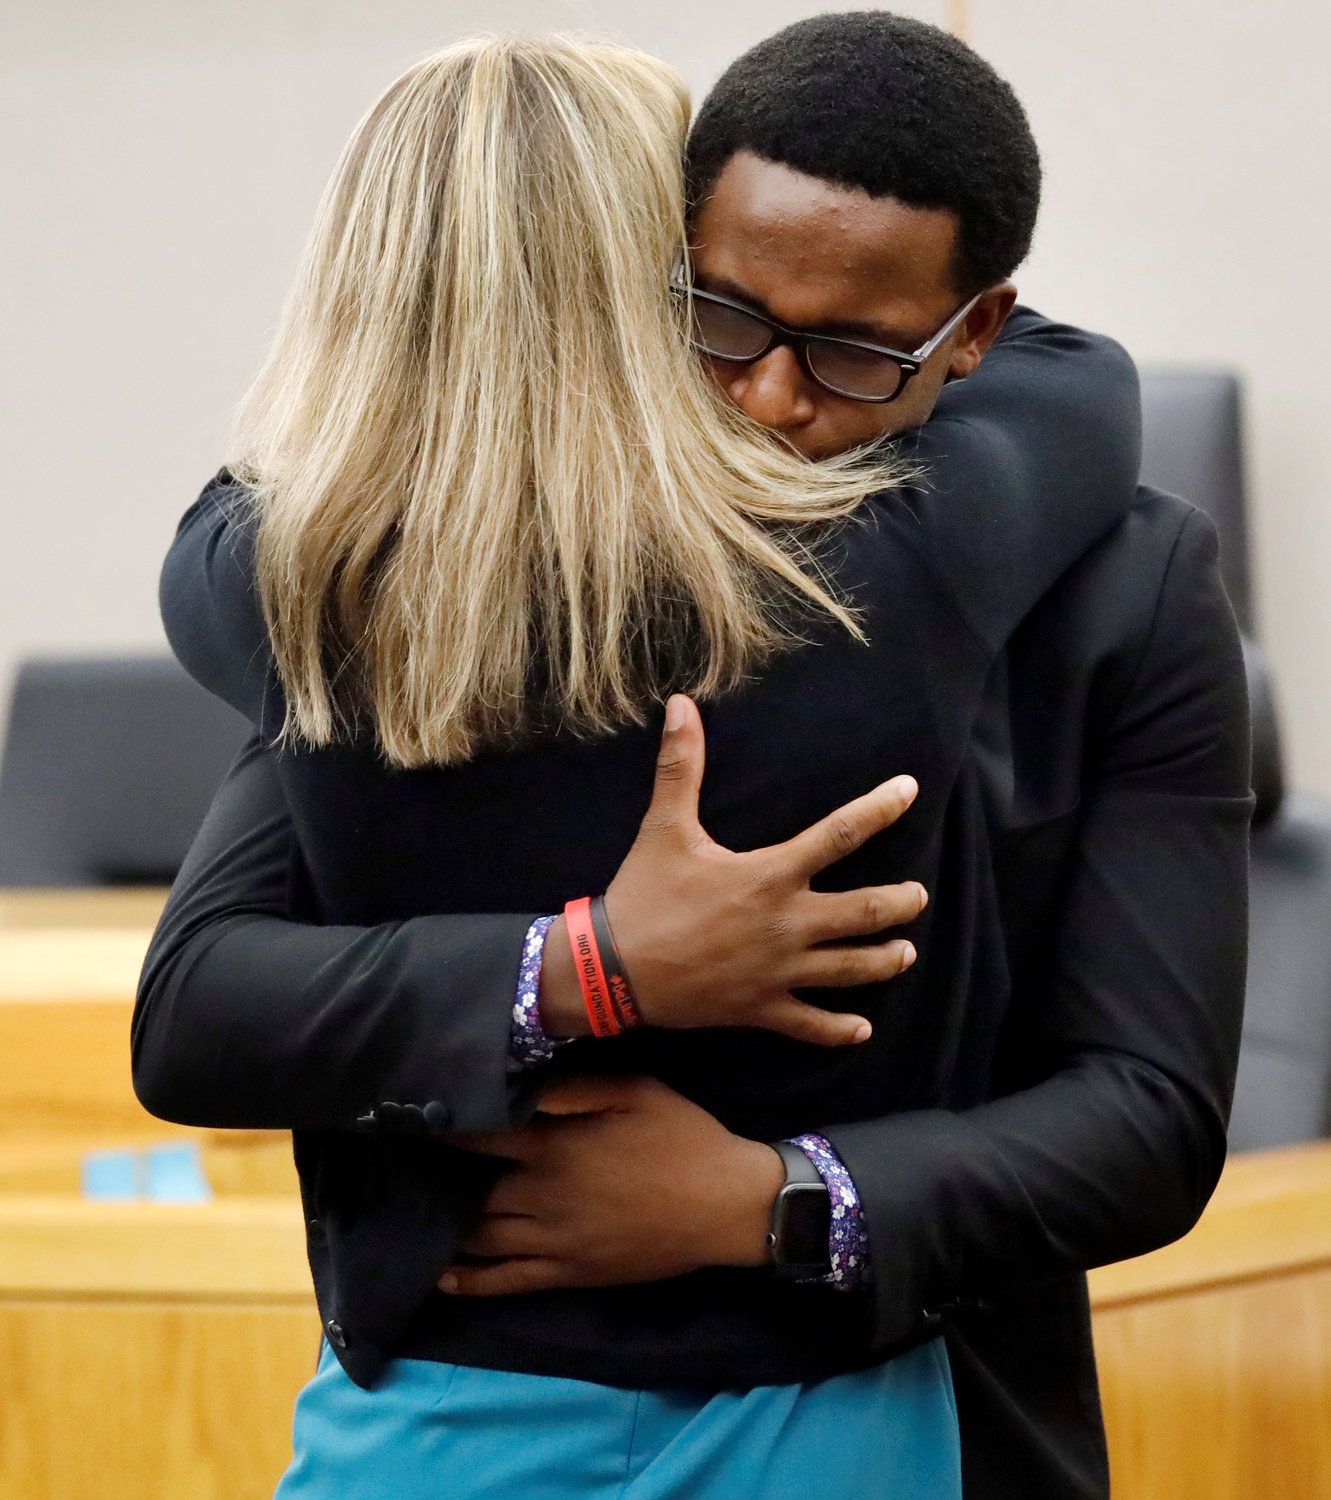 Brandt Jean, the younger brother of murder victim Botham Jean, delivers an impact statement to former Dallas police officer Amber Guyger at the Frank Crowley Courts Building in Dallas following Guyger’s Oct. 2, 2019, sentencing to 10 years in prison for murdering Botham.